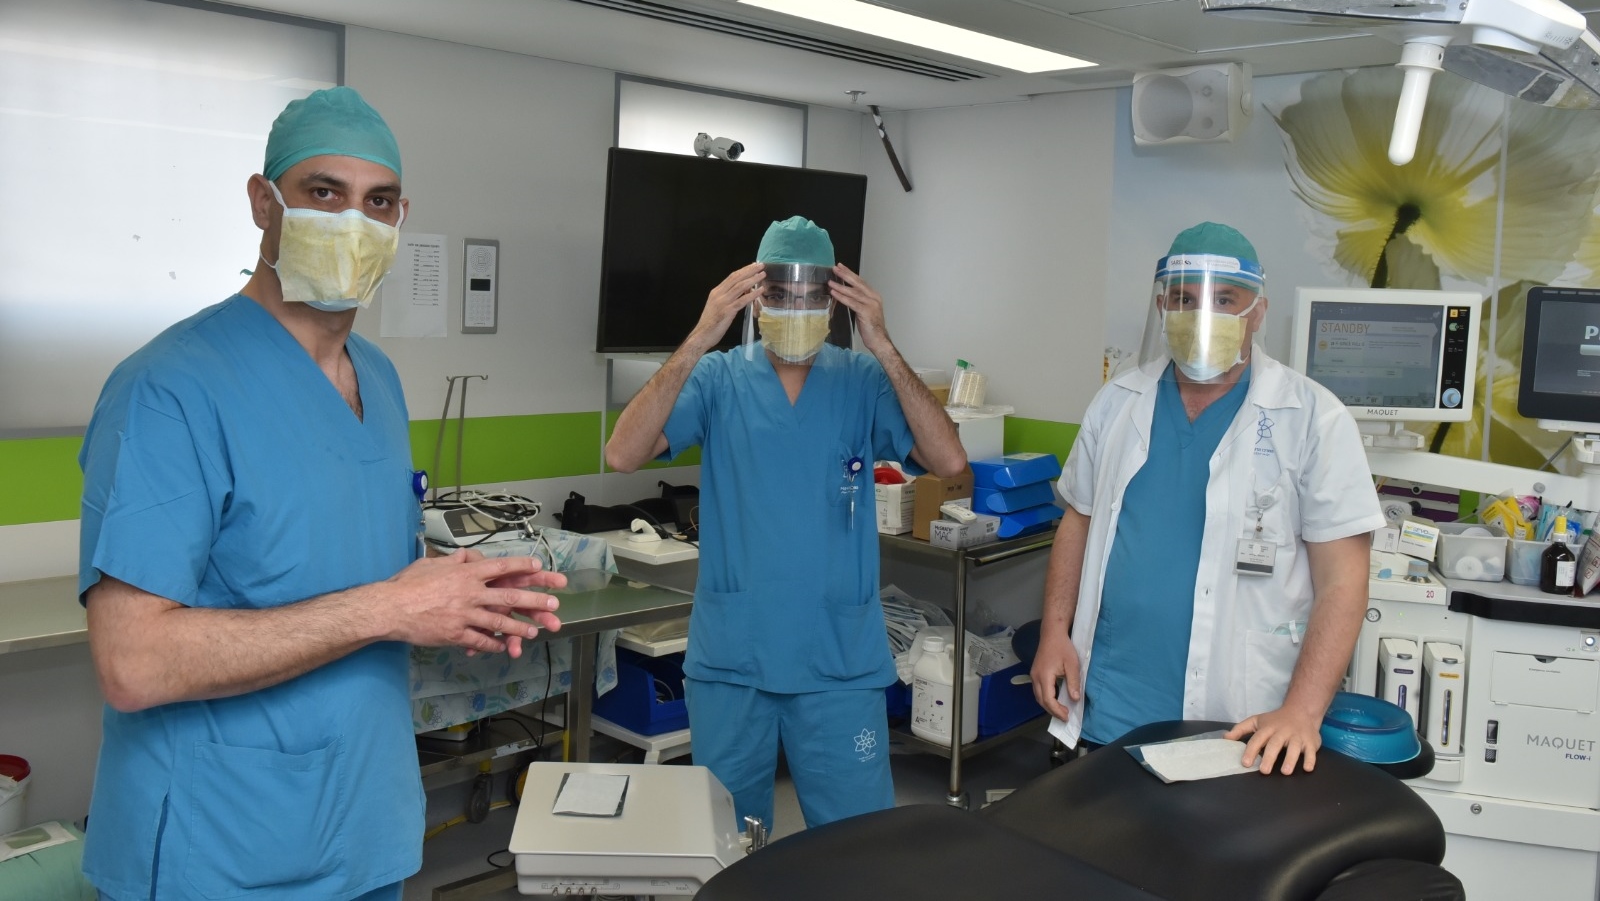 Dr. Samer Srouji, left, and members of his oral & maxillofacial surgery team at Galilee Medical Center testing the Maya sticker on their surgical masks. Photo by Eli Cohen